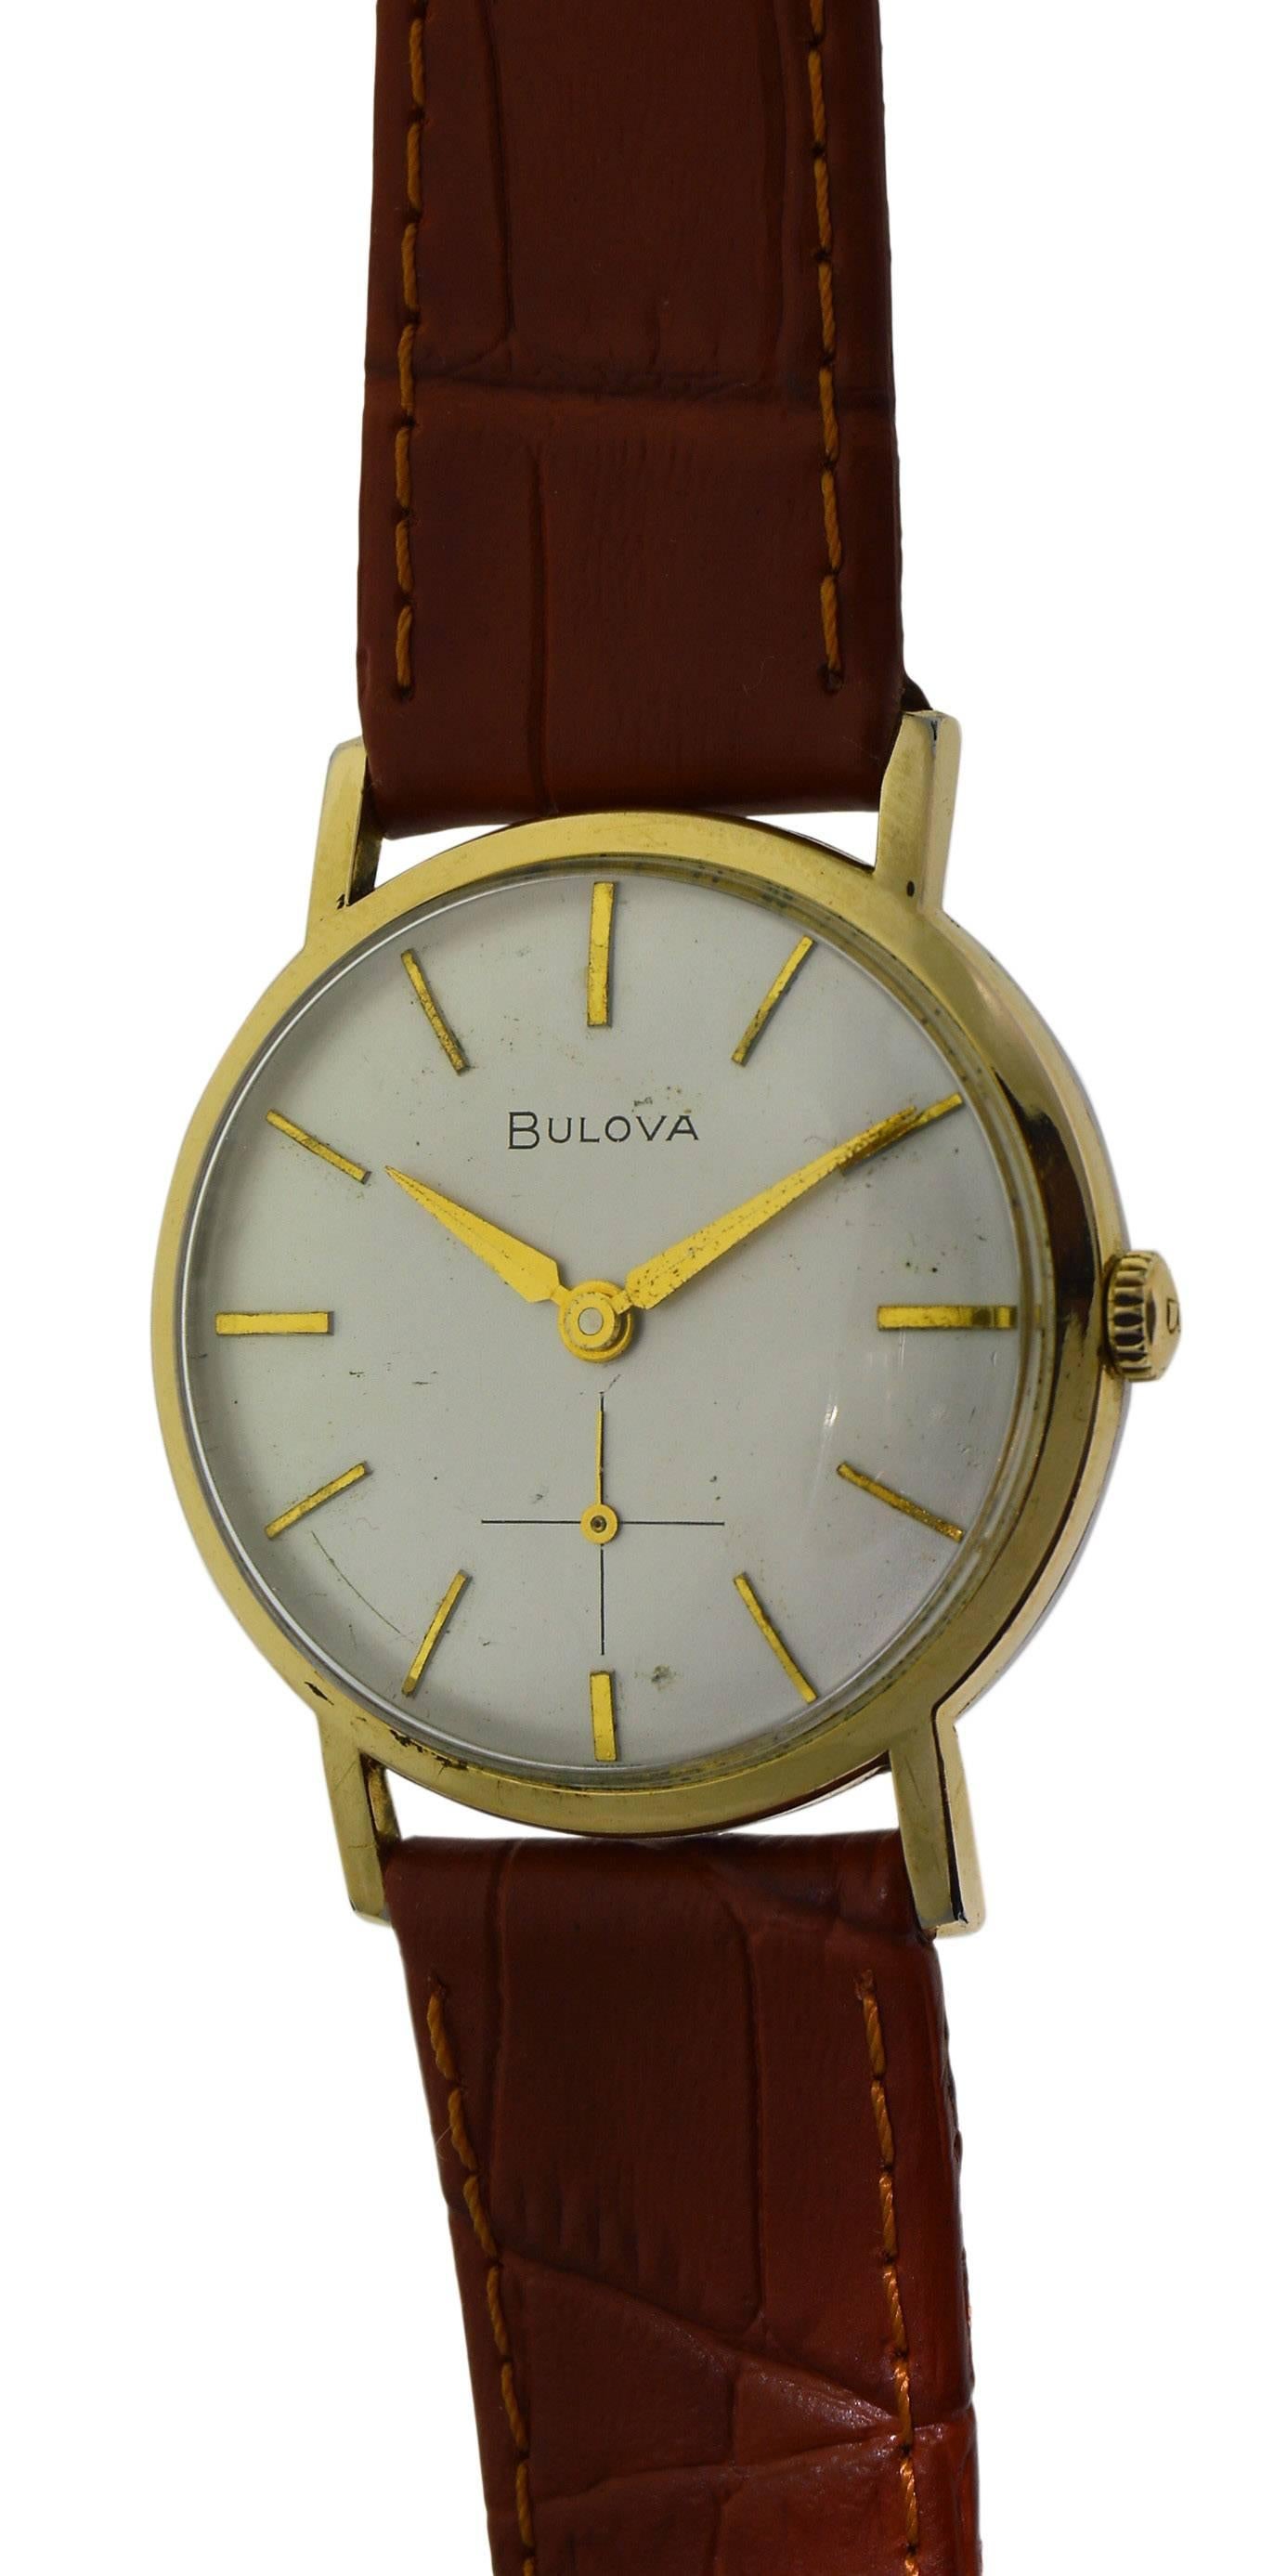 FACTORY / HOUSE: Bulova Watch Company
STYLE / REFERENCE: Round / Classical
METAL / MATERIAL: Yellow Gold Filled
CIRCA: 1960's
DIMENSIONS: 38mm X 32mm
MOVEMENT / CALIBER: Manual Winding / 17 Jewels 
DIAL / HANDS: Original Silvered with Baton Markers